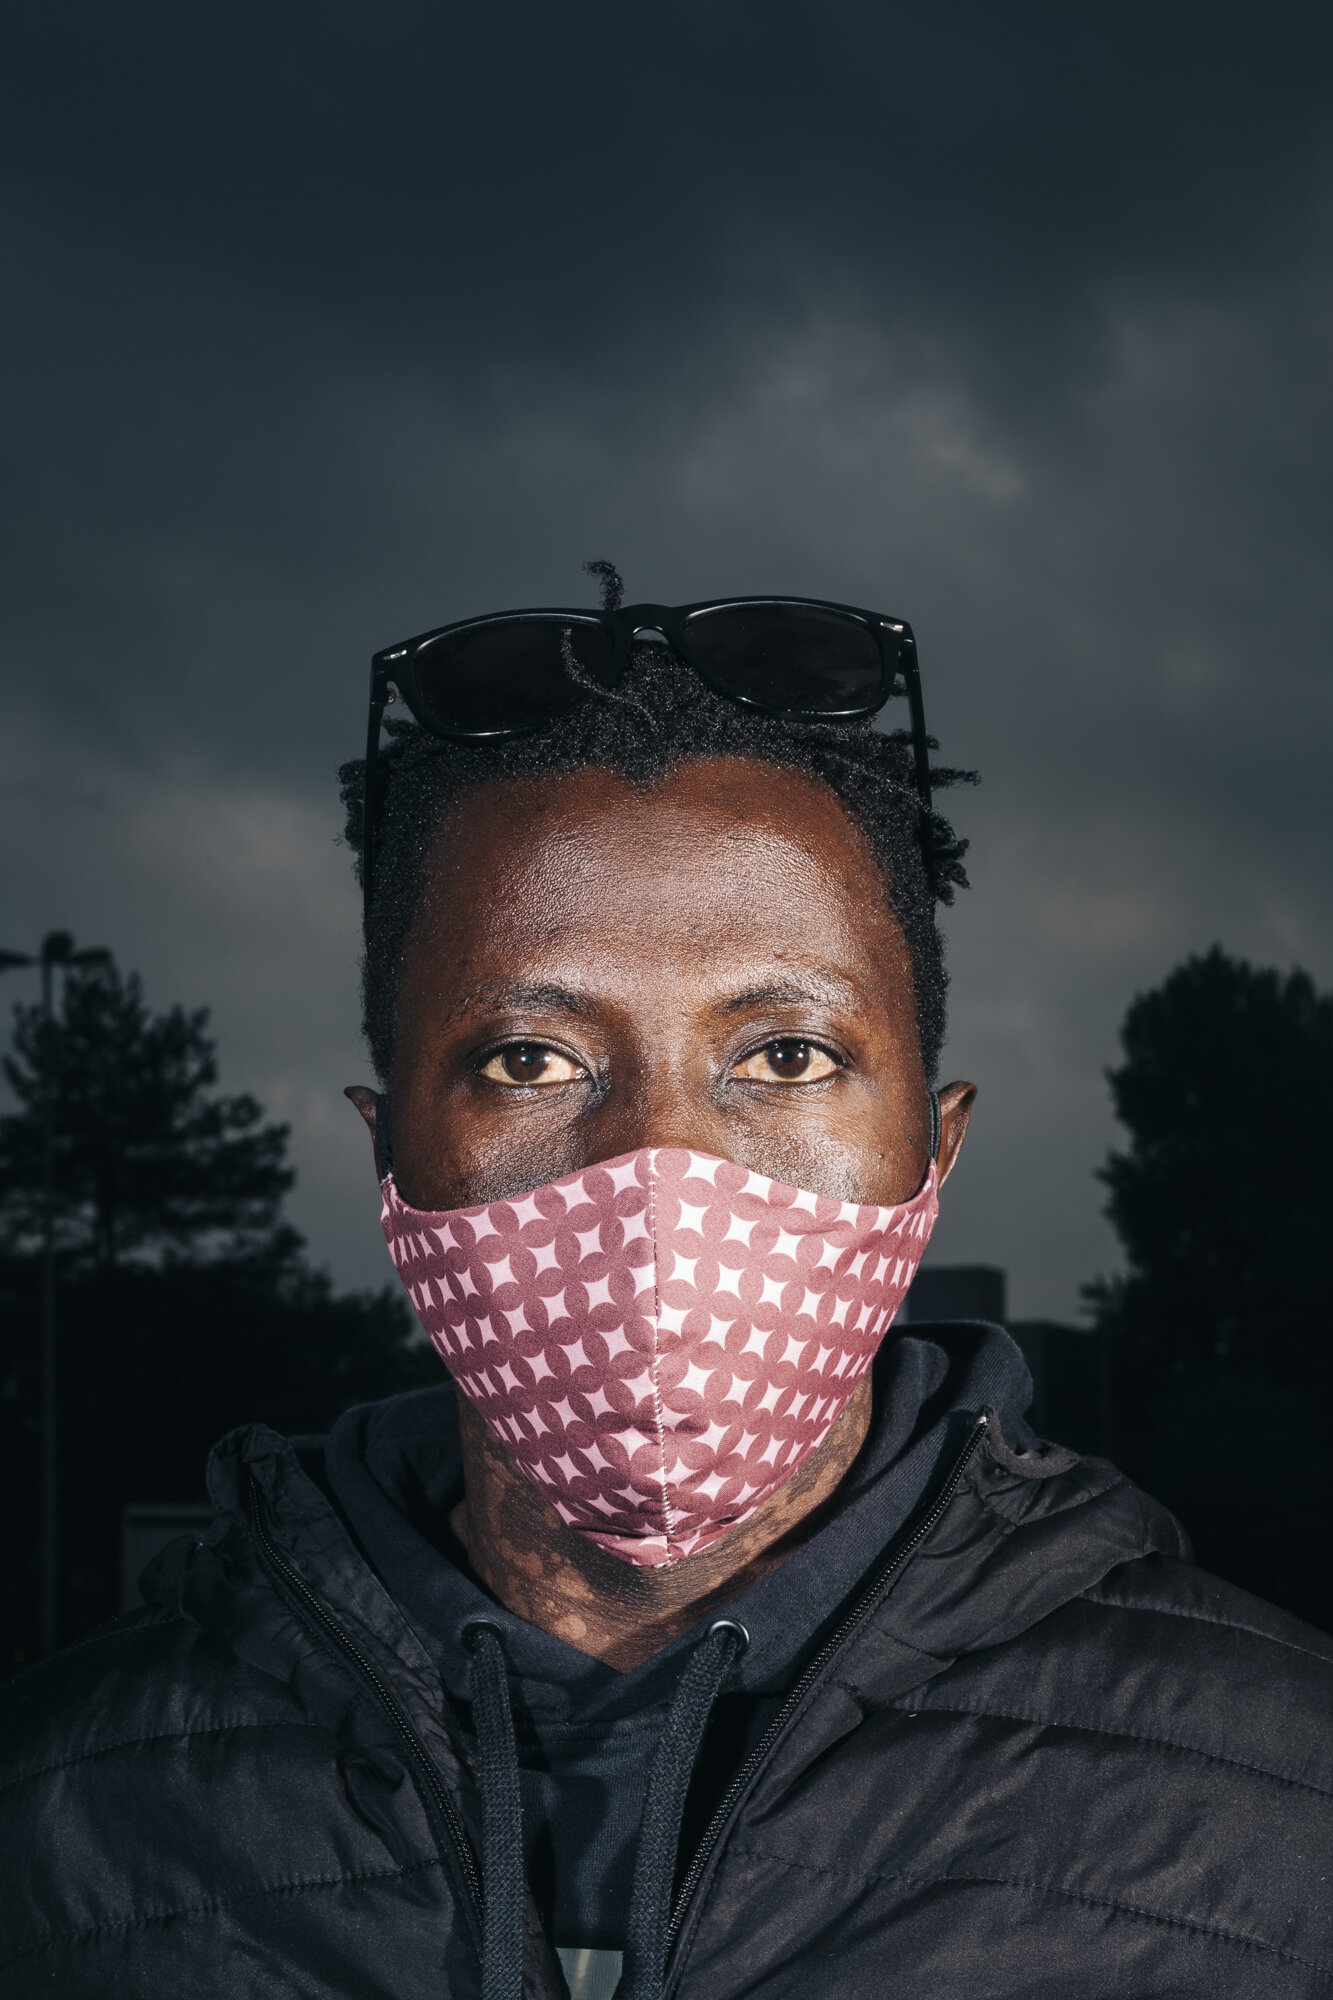  Omar poses for a portrait. He is an activist and criticizes the conditions in the refugee shelter „Lindenstraße“ in Bremen in the context of the Corona crisis. In April 2020 about 600 refugees are accommodatedhere, with more than 150 confirmed cases